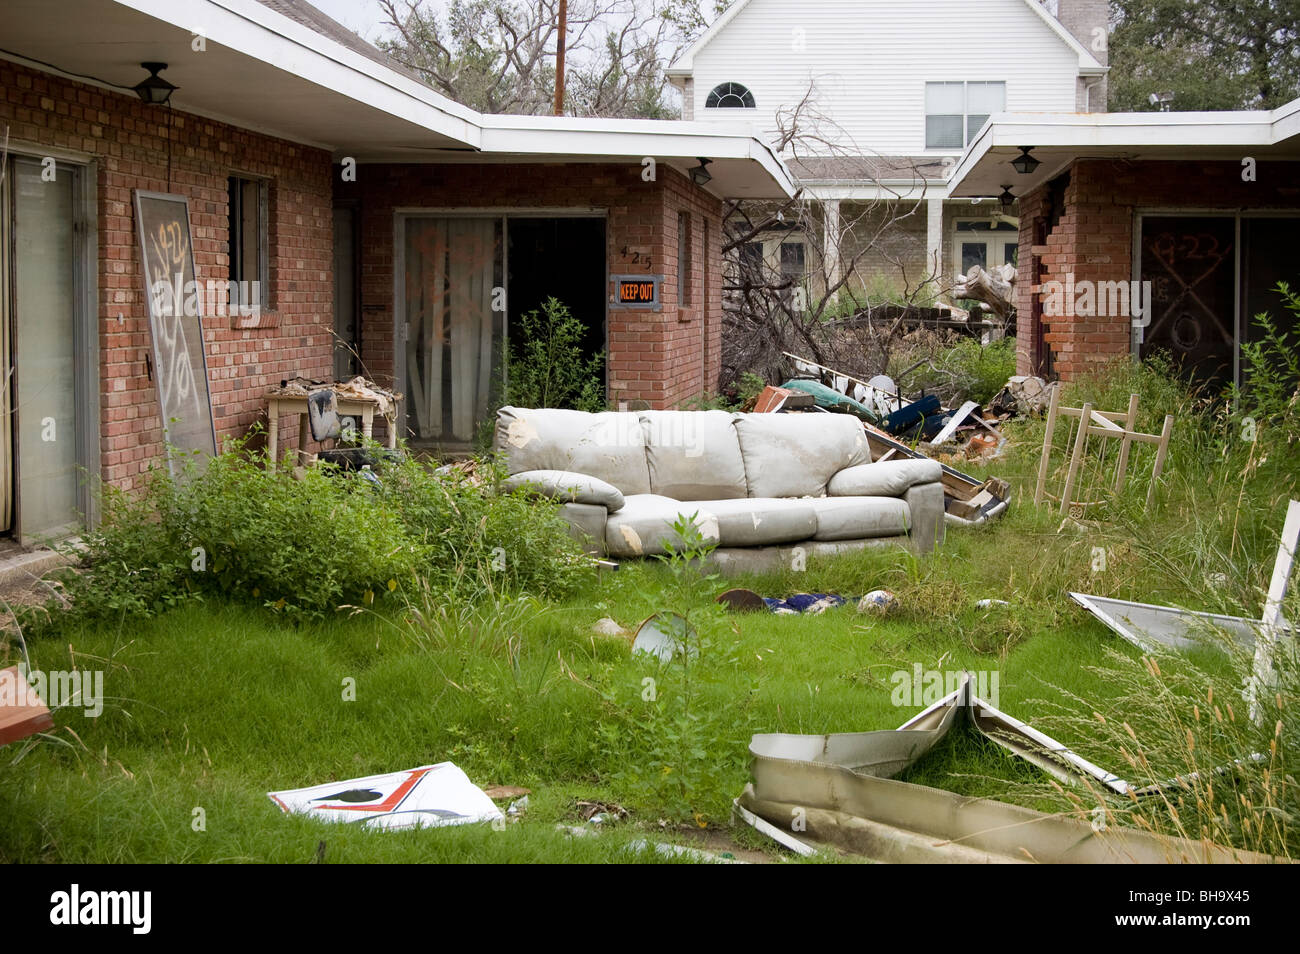 Destruction seen 9 months after the flooding by Hurricane Katrina, New Orleans, LA. Stock Photo